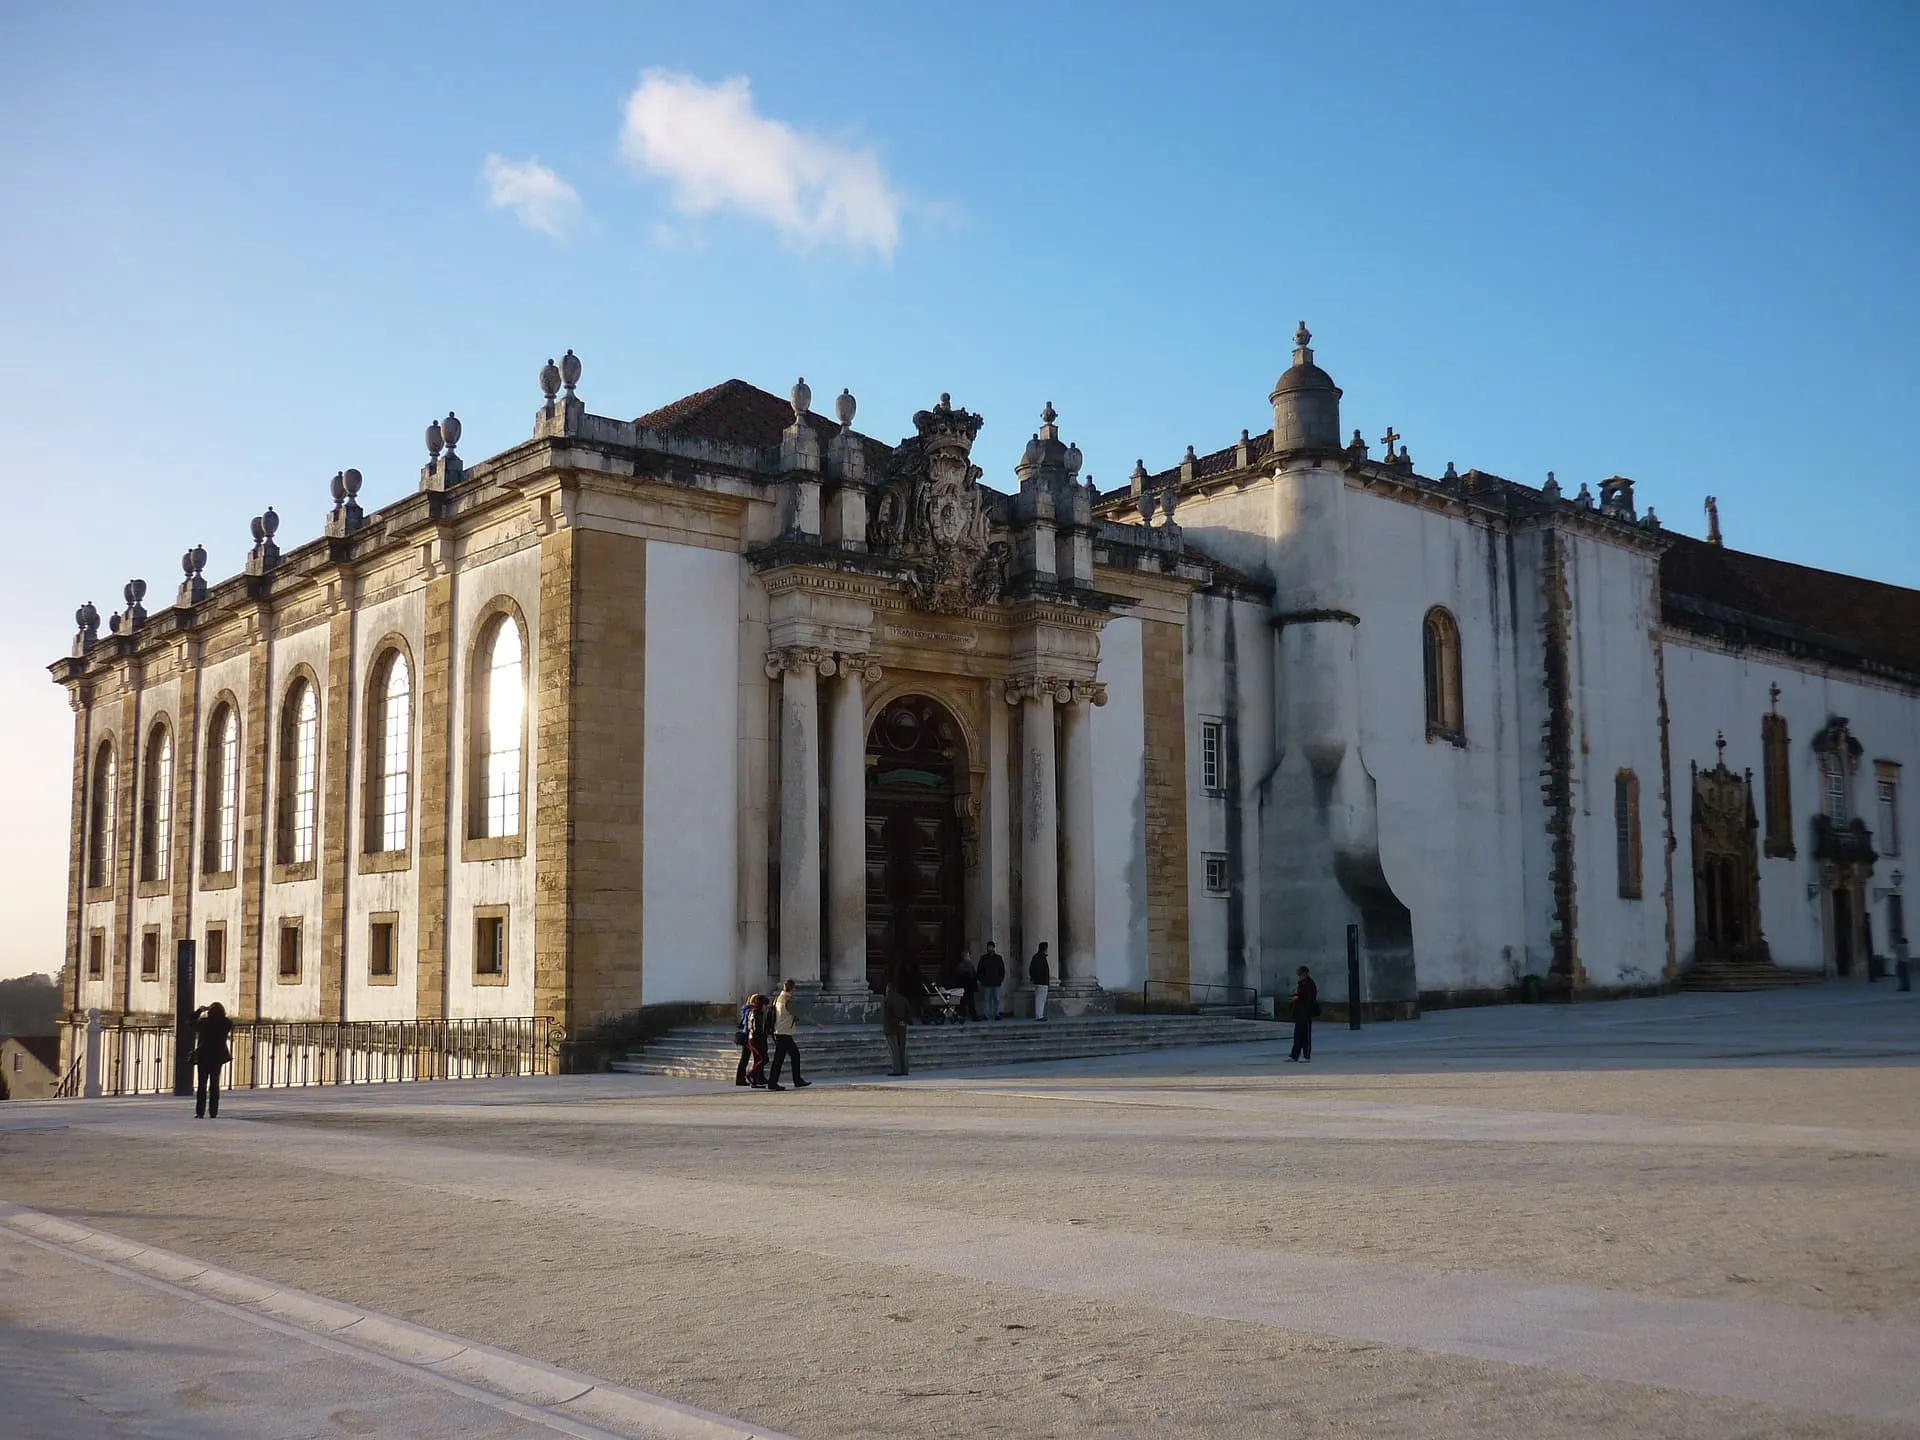 What Will I Encounter During the Camino Portugués?